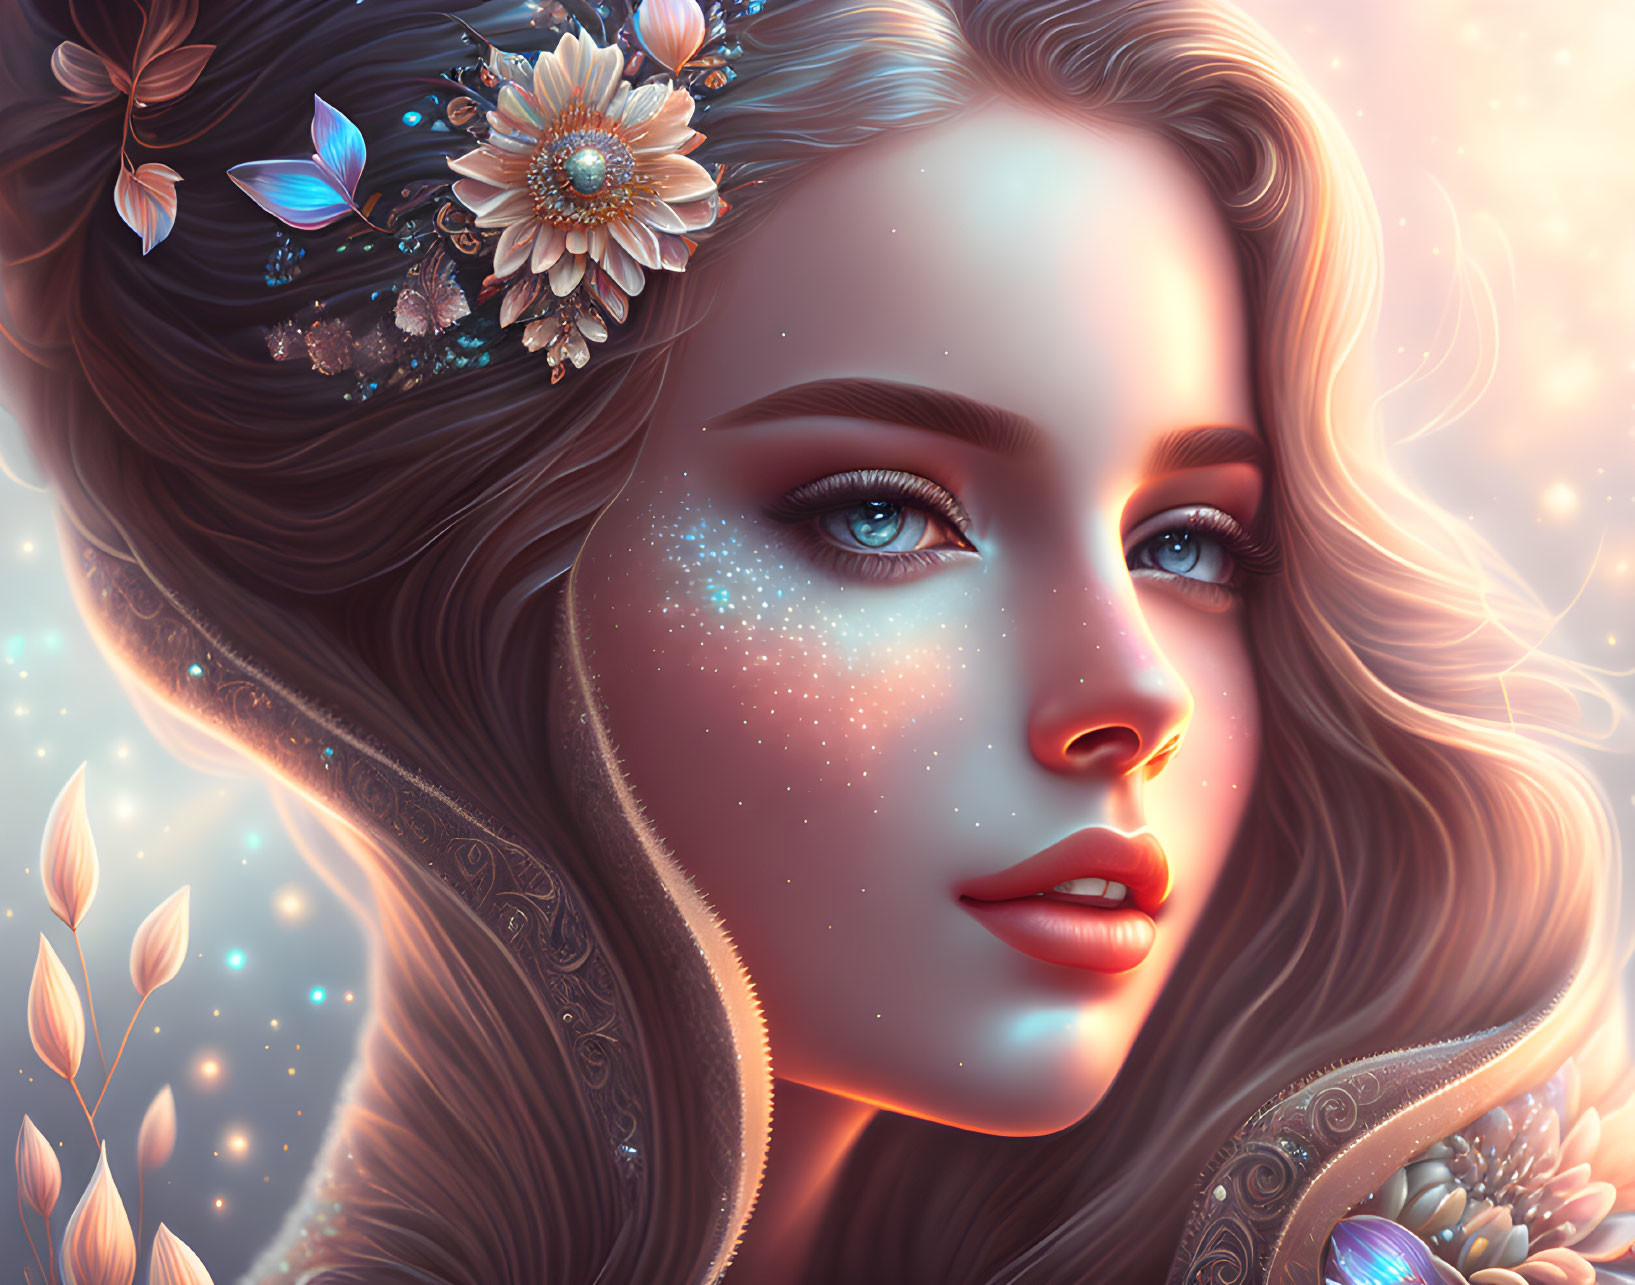 Fantasy illustration: Woman with blue eyes and cosmic freckles, adorned with flowers and butterflies